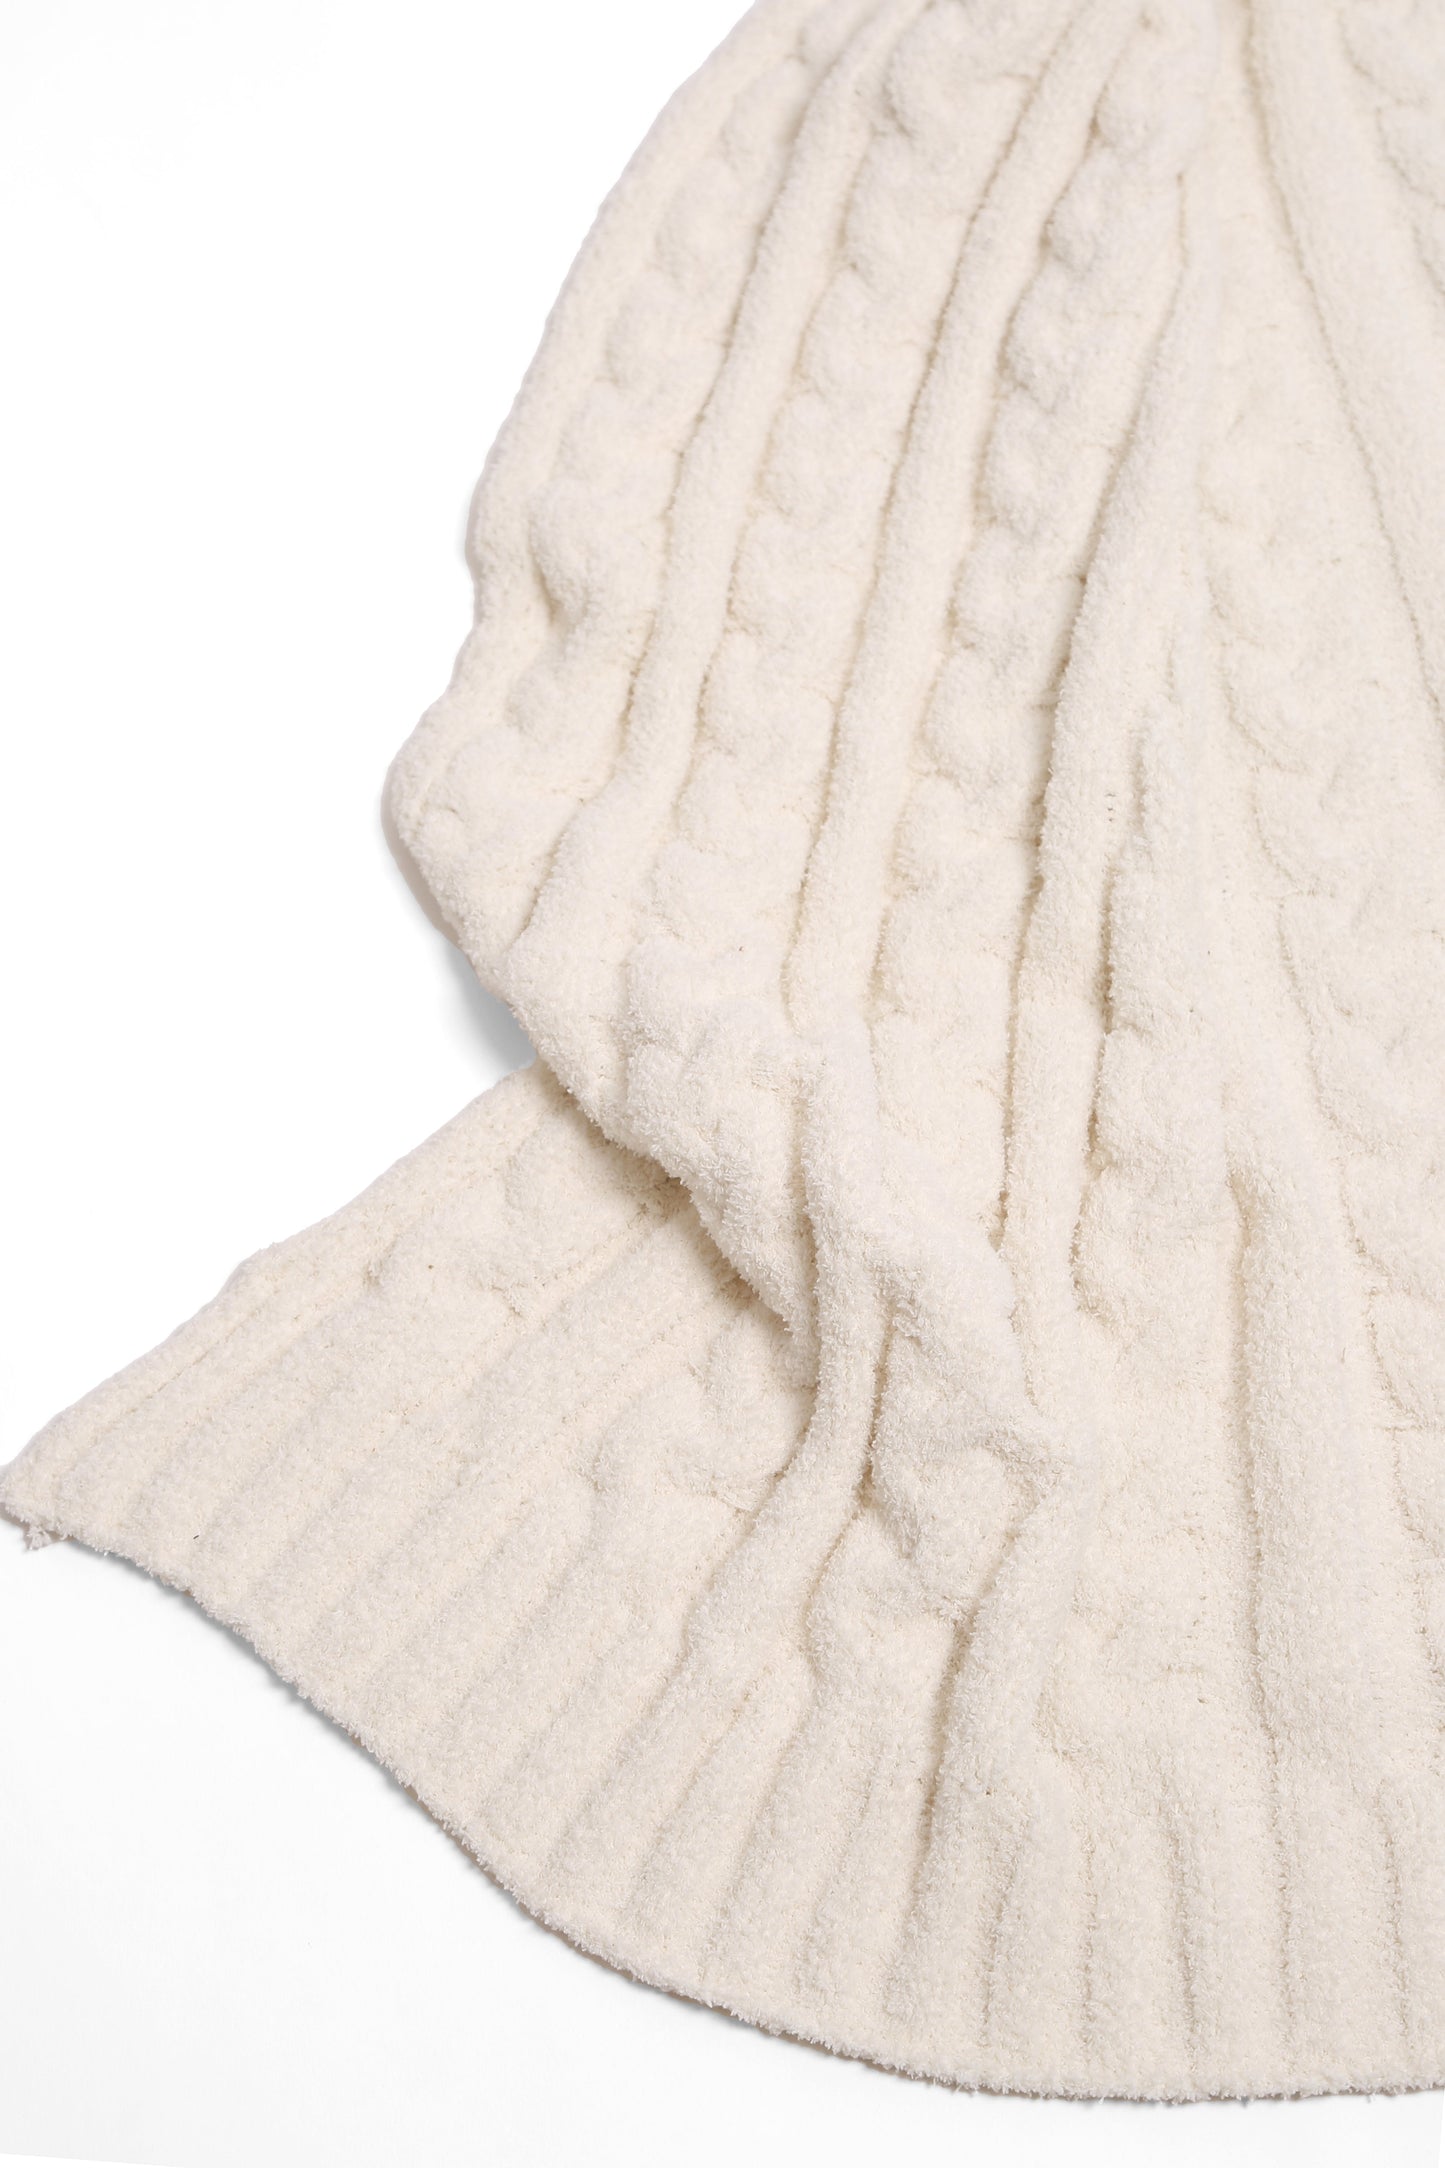 Braided Cable Knit Throw Blanket Gifts Ivory